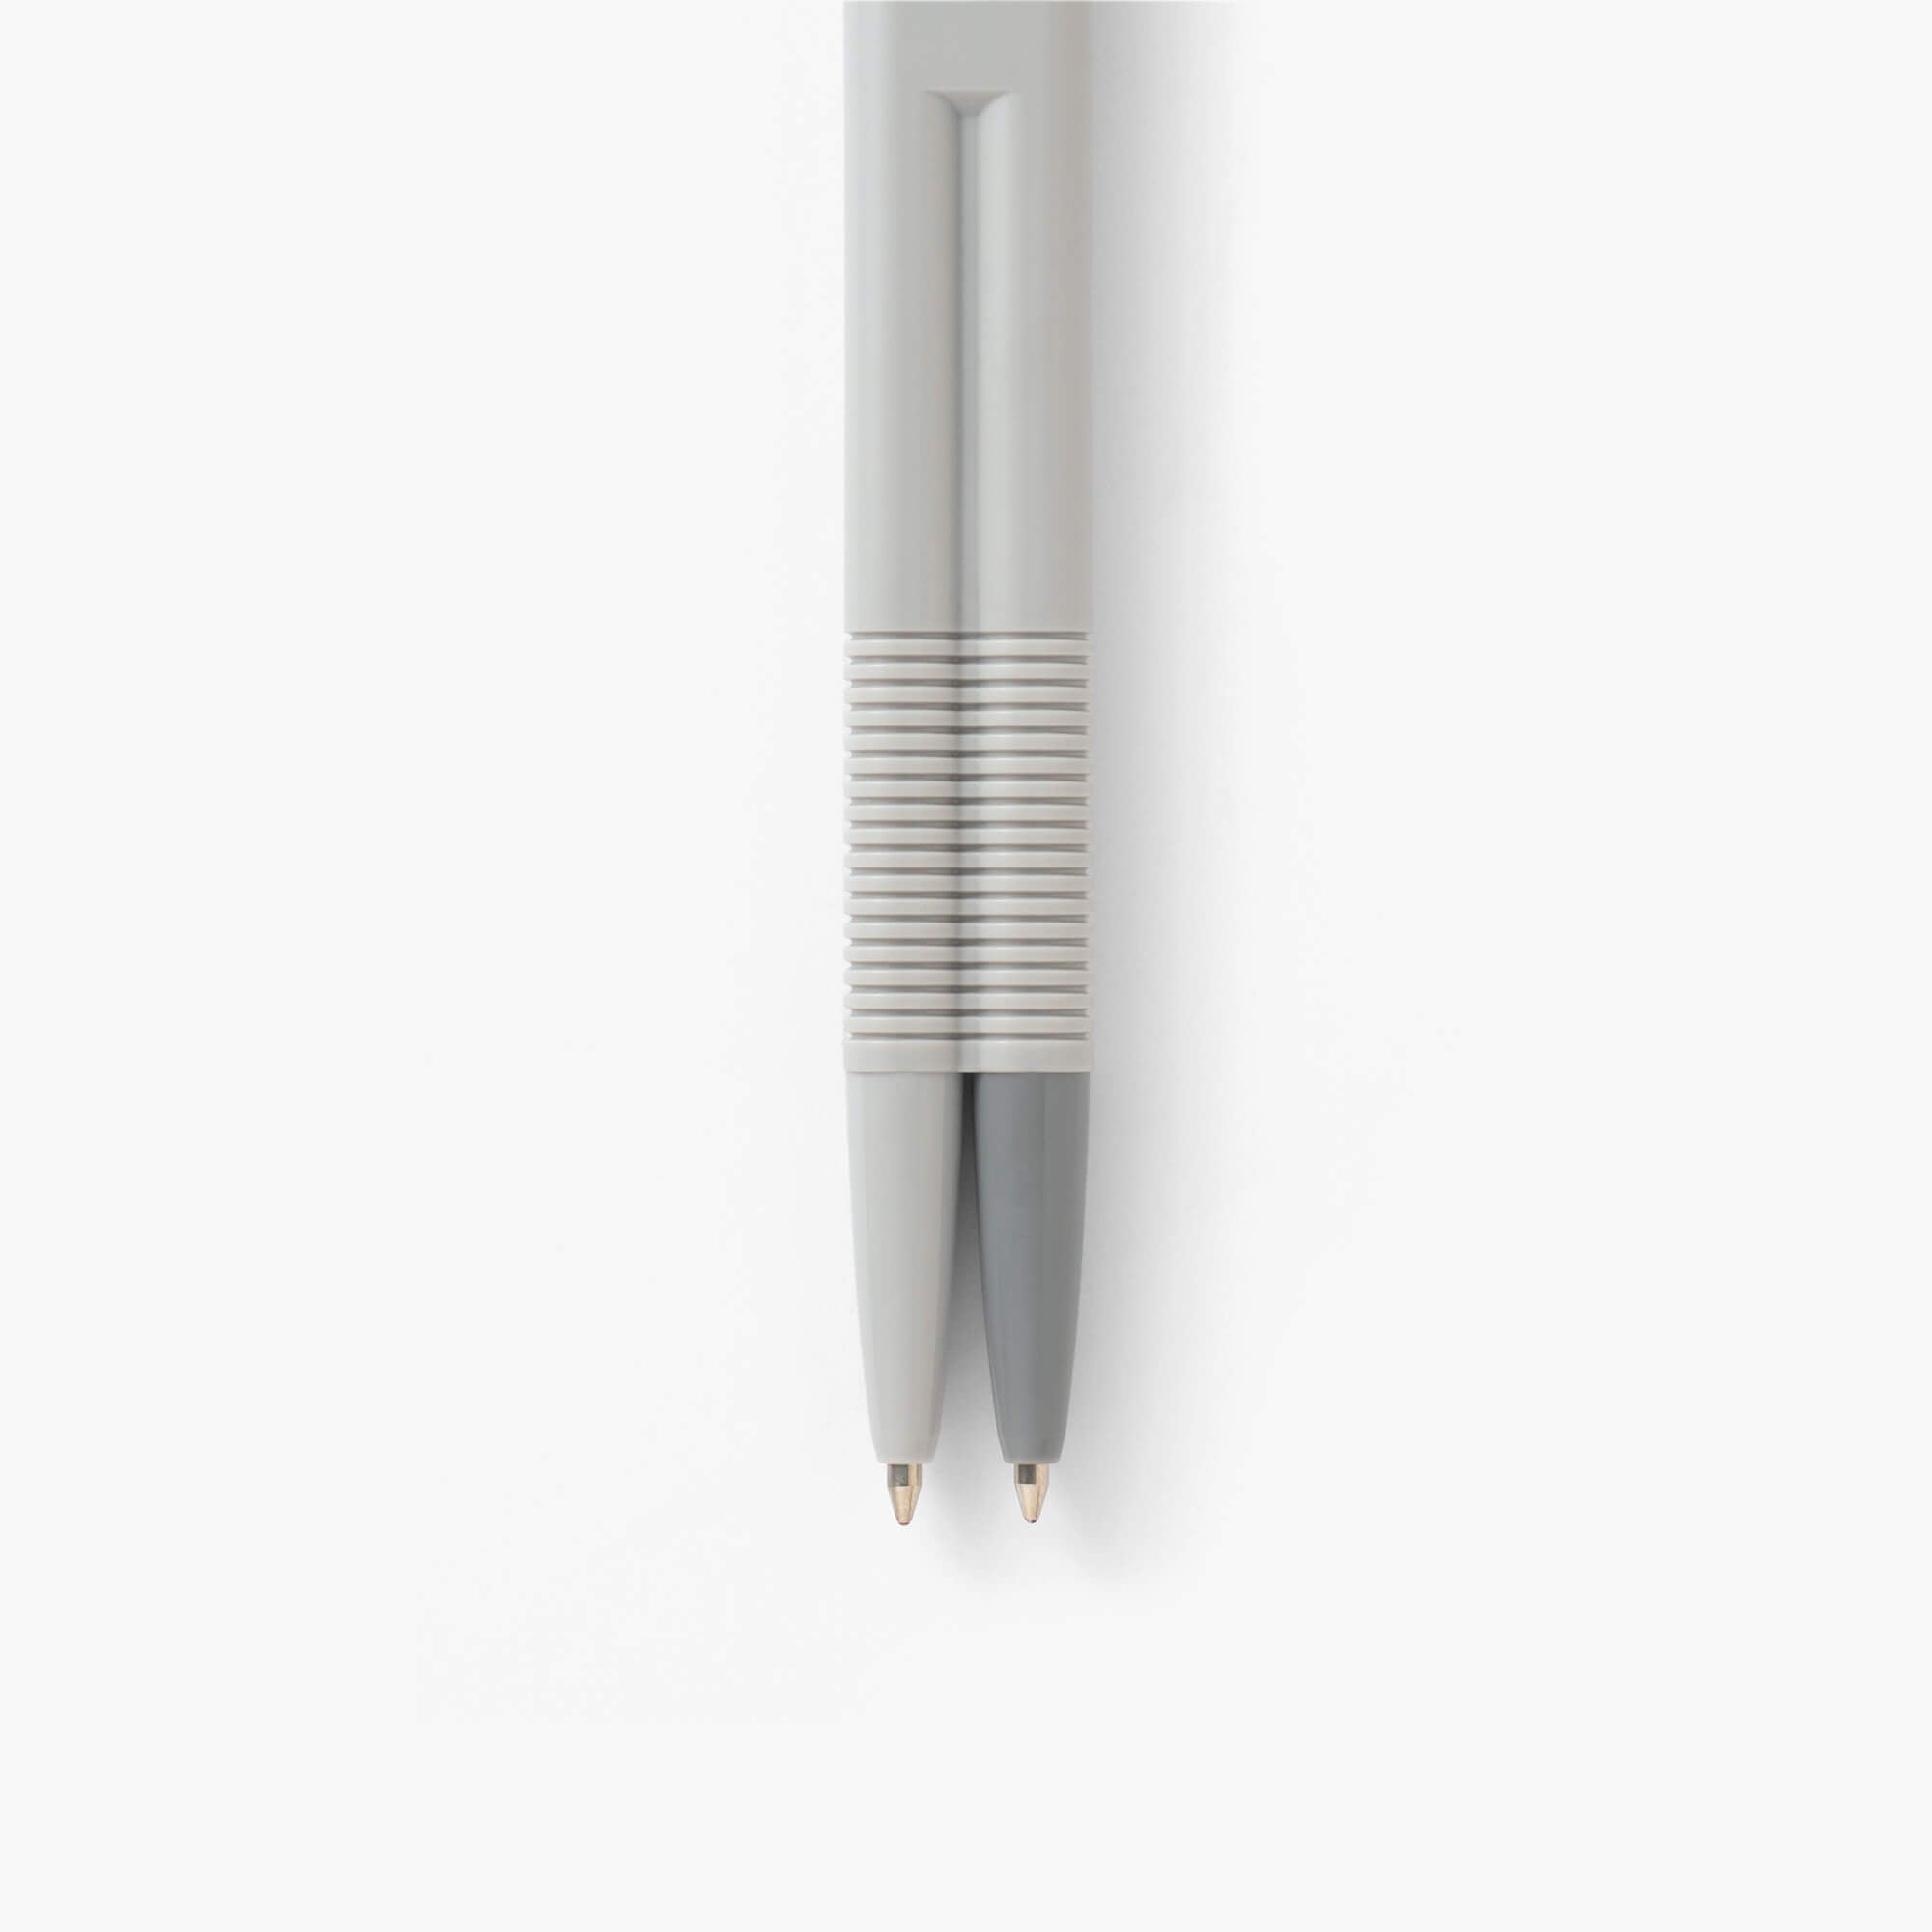 Object Index - Toggle Pen